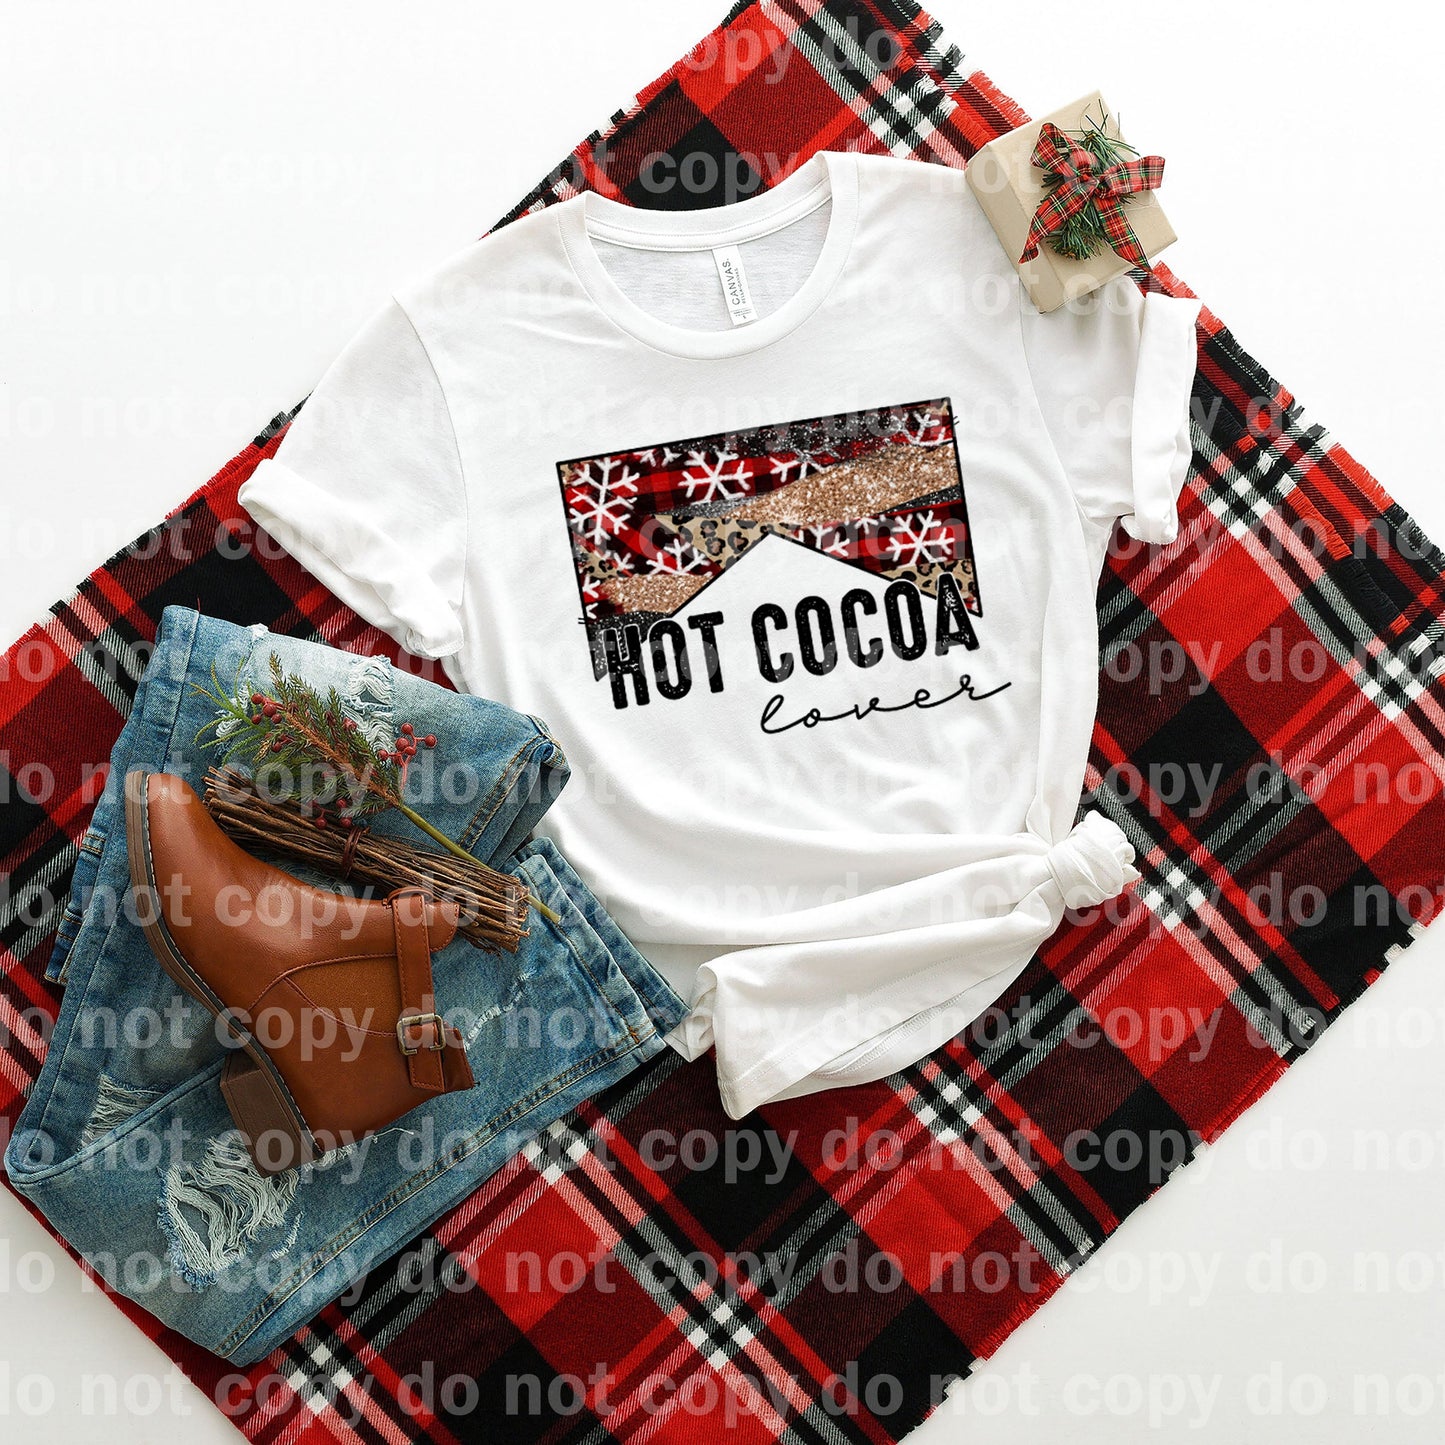 Hot Cocoa Lover Dream Print or Sublimation Print